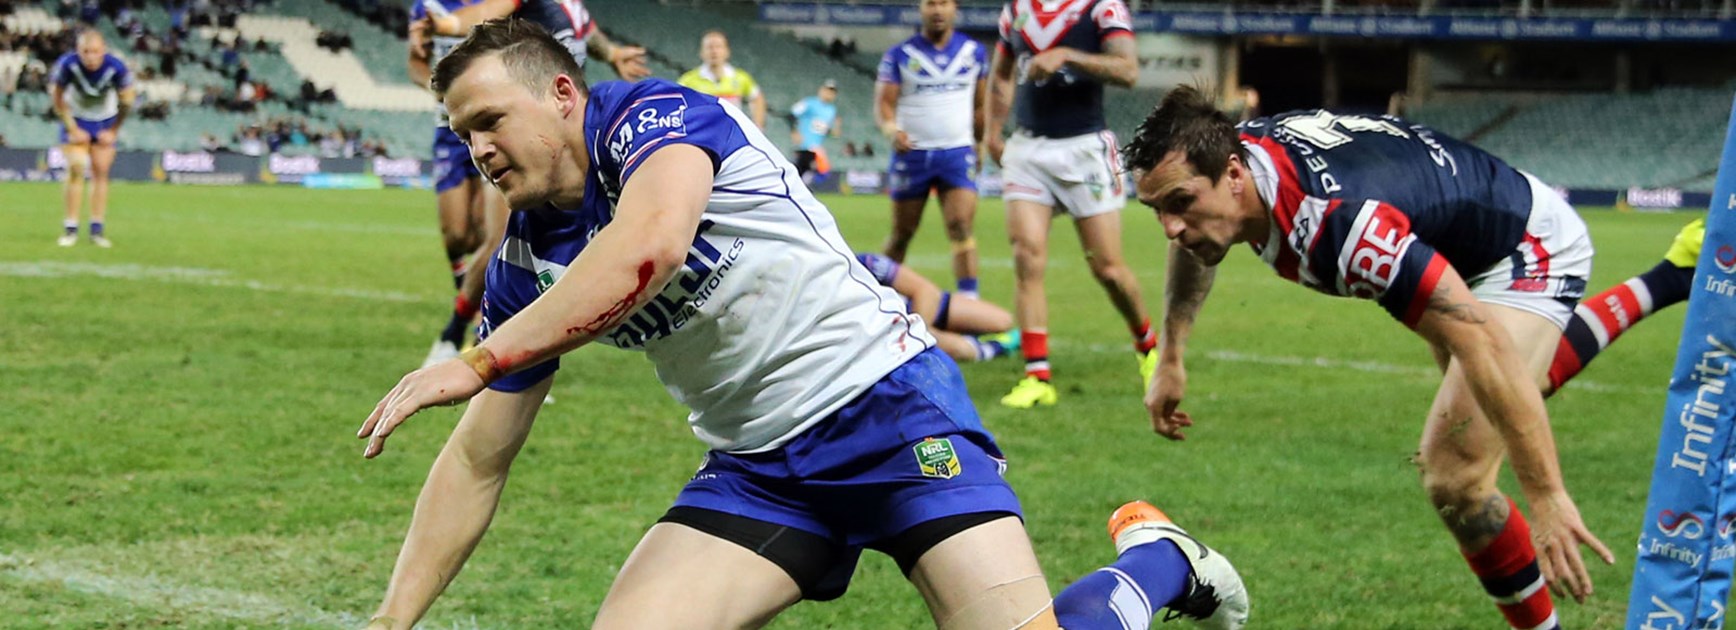 Bulldogs winger Brett Morris scored two tries against the Roosters in Round 17.